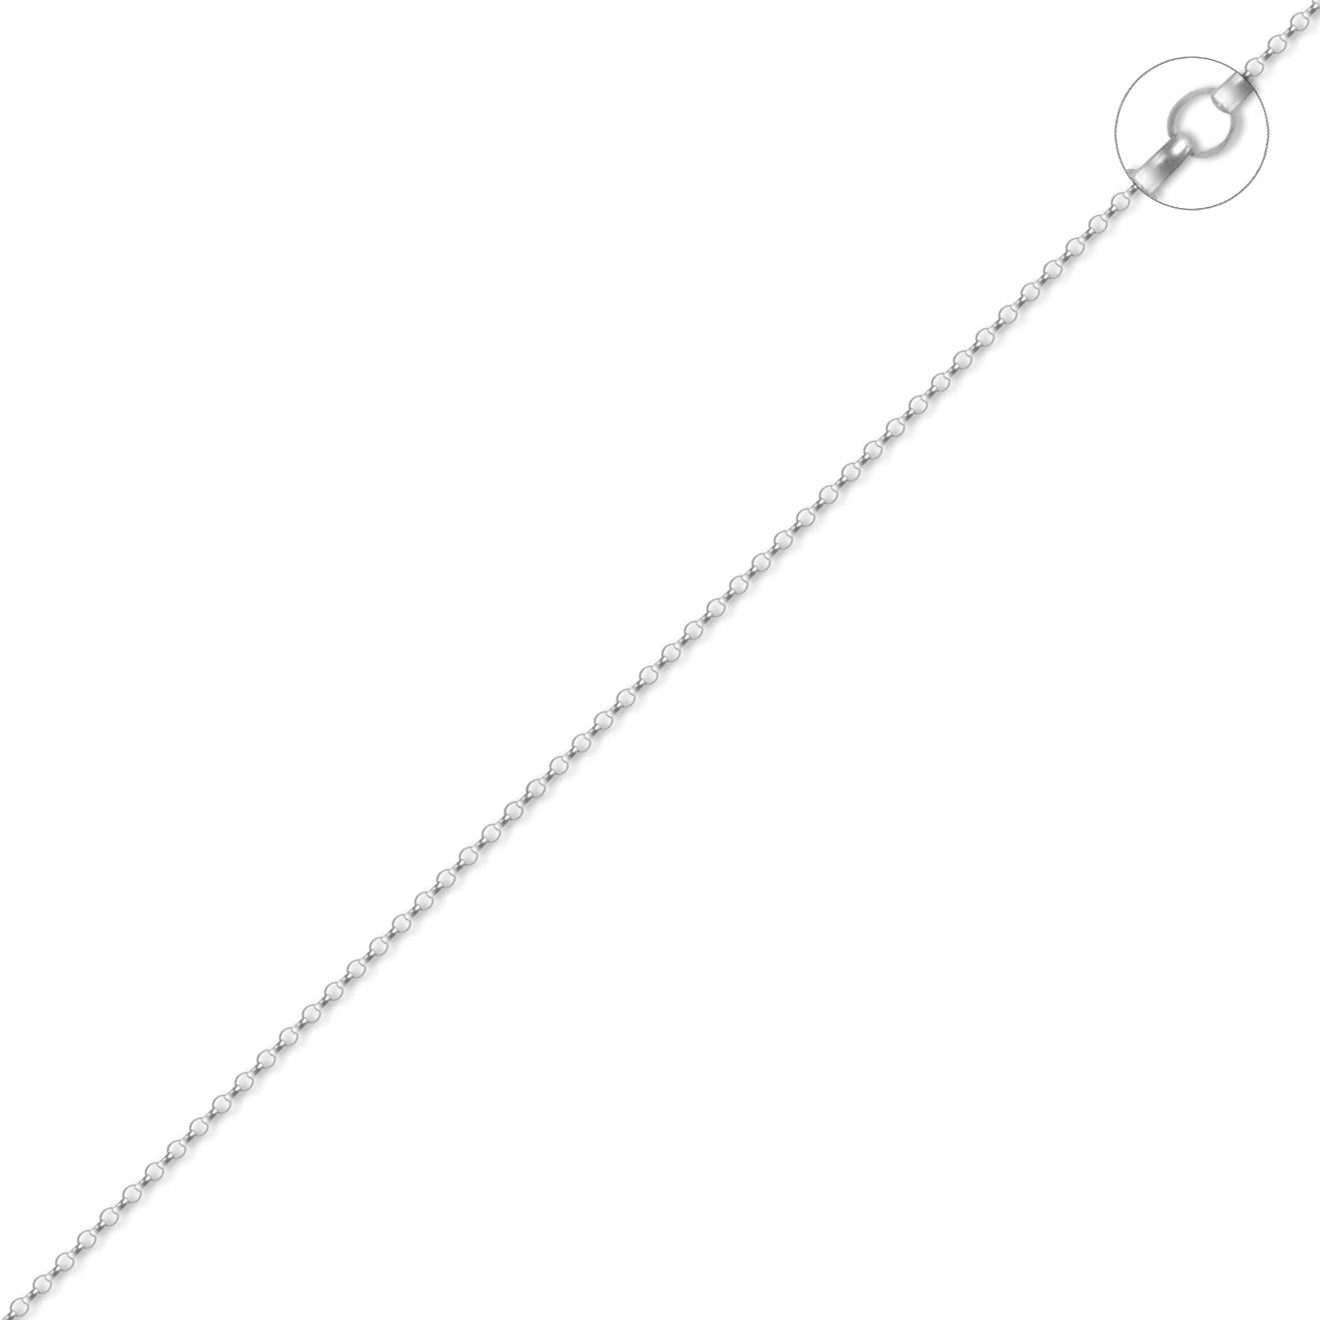 18ct White Gold  Micro Belcher 1.6mm Pendant Chain Necklace - JCN072A